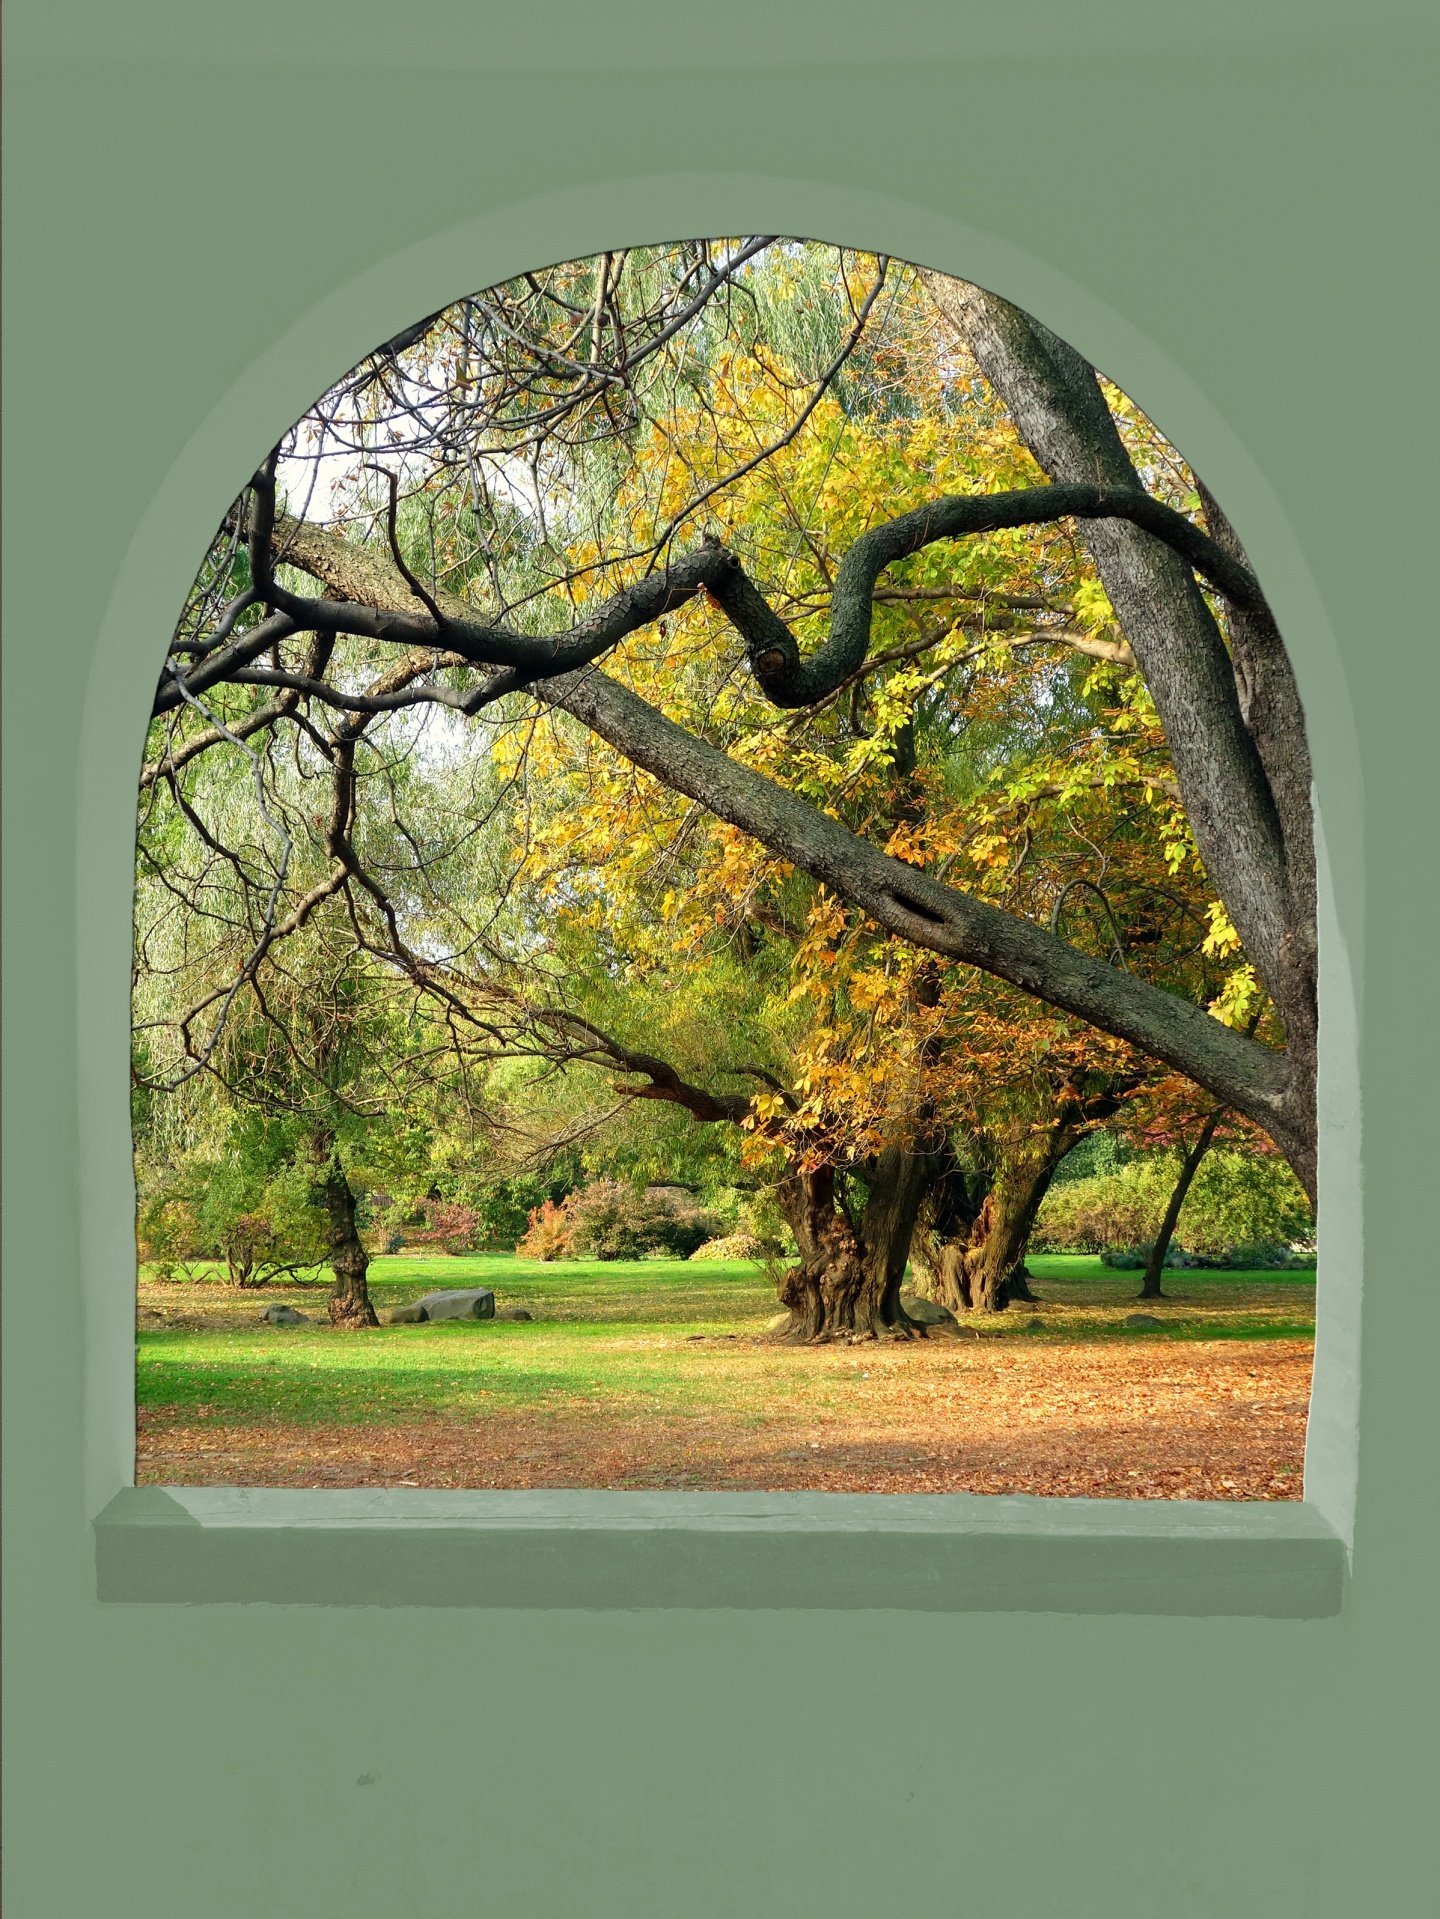 View of garden and trees in autumn through an arched window frame